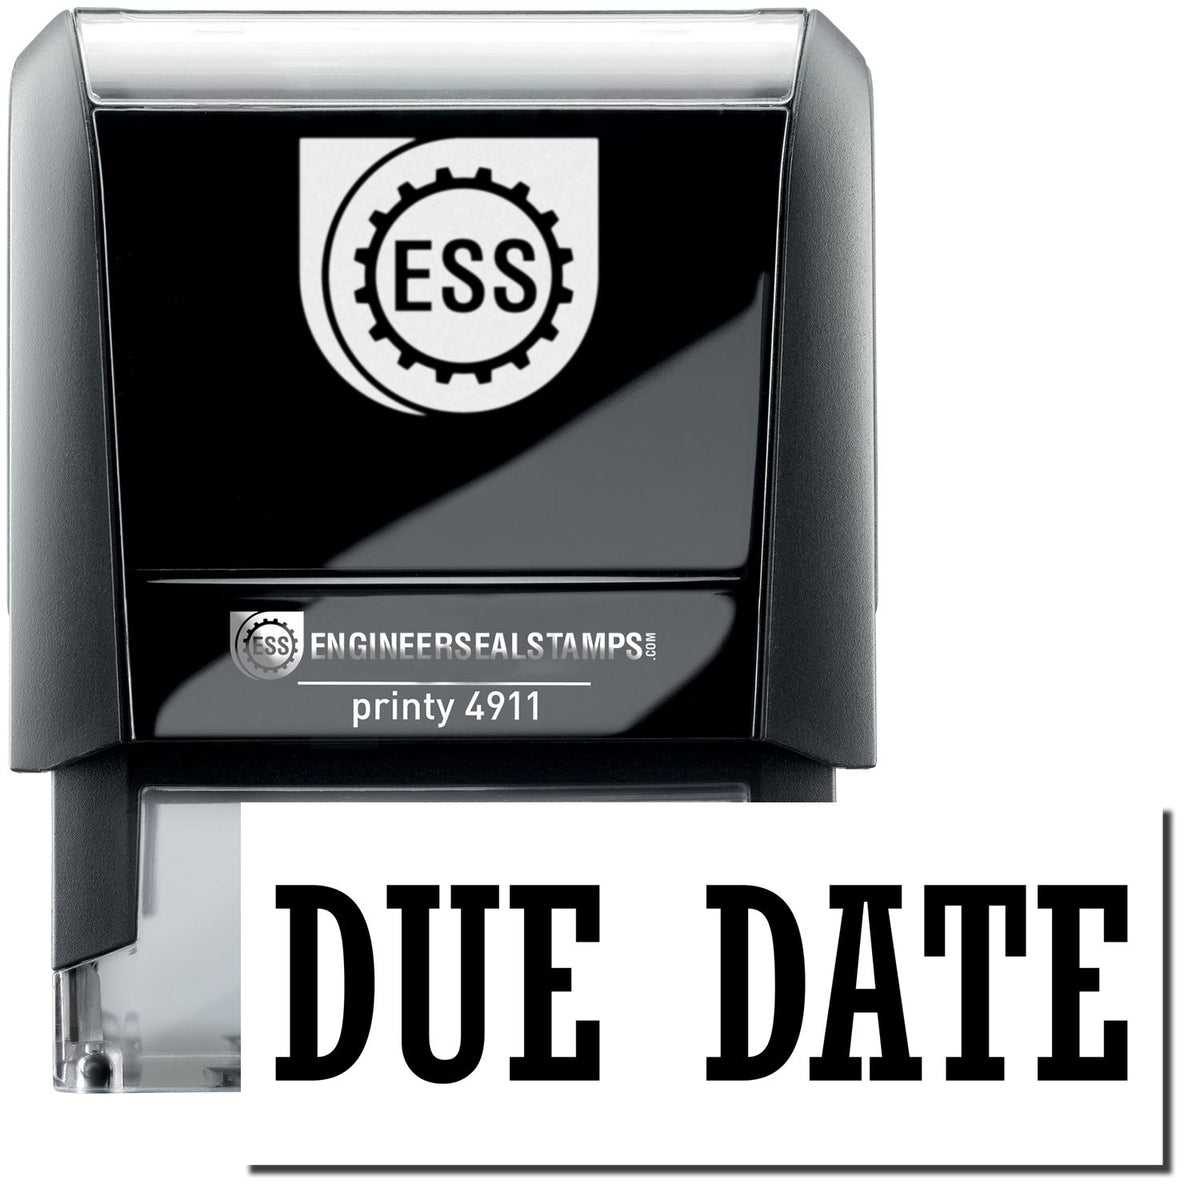 A self-inking stamp with a stamped image showing how the text &quot;DUE DATE&quot; is displayed after stamping.